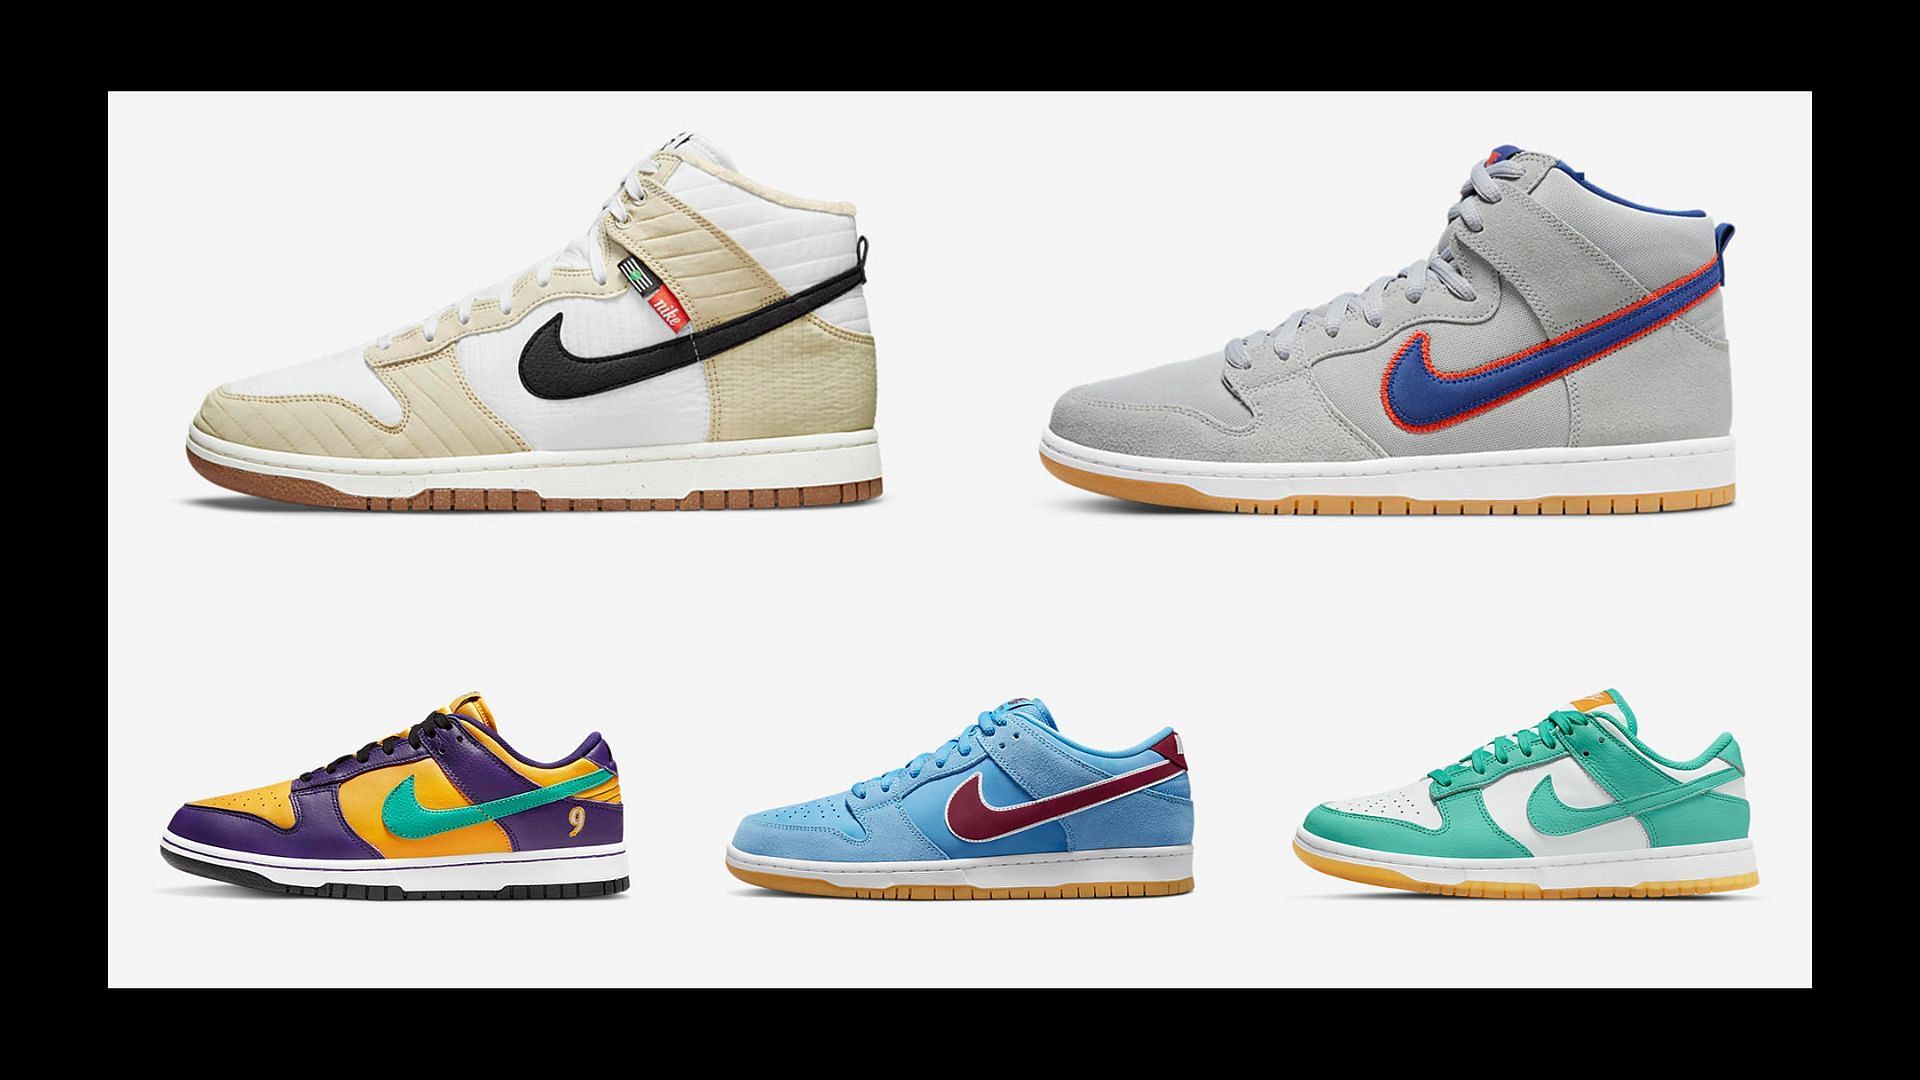 5 upcoming Nike upcoming nike sb dunks Dunk releases in July 2022